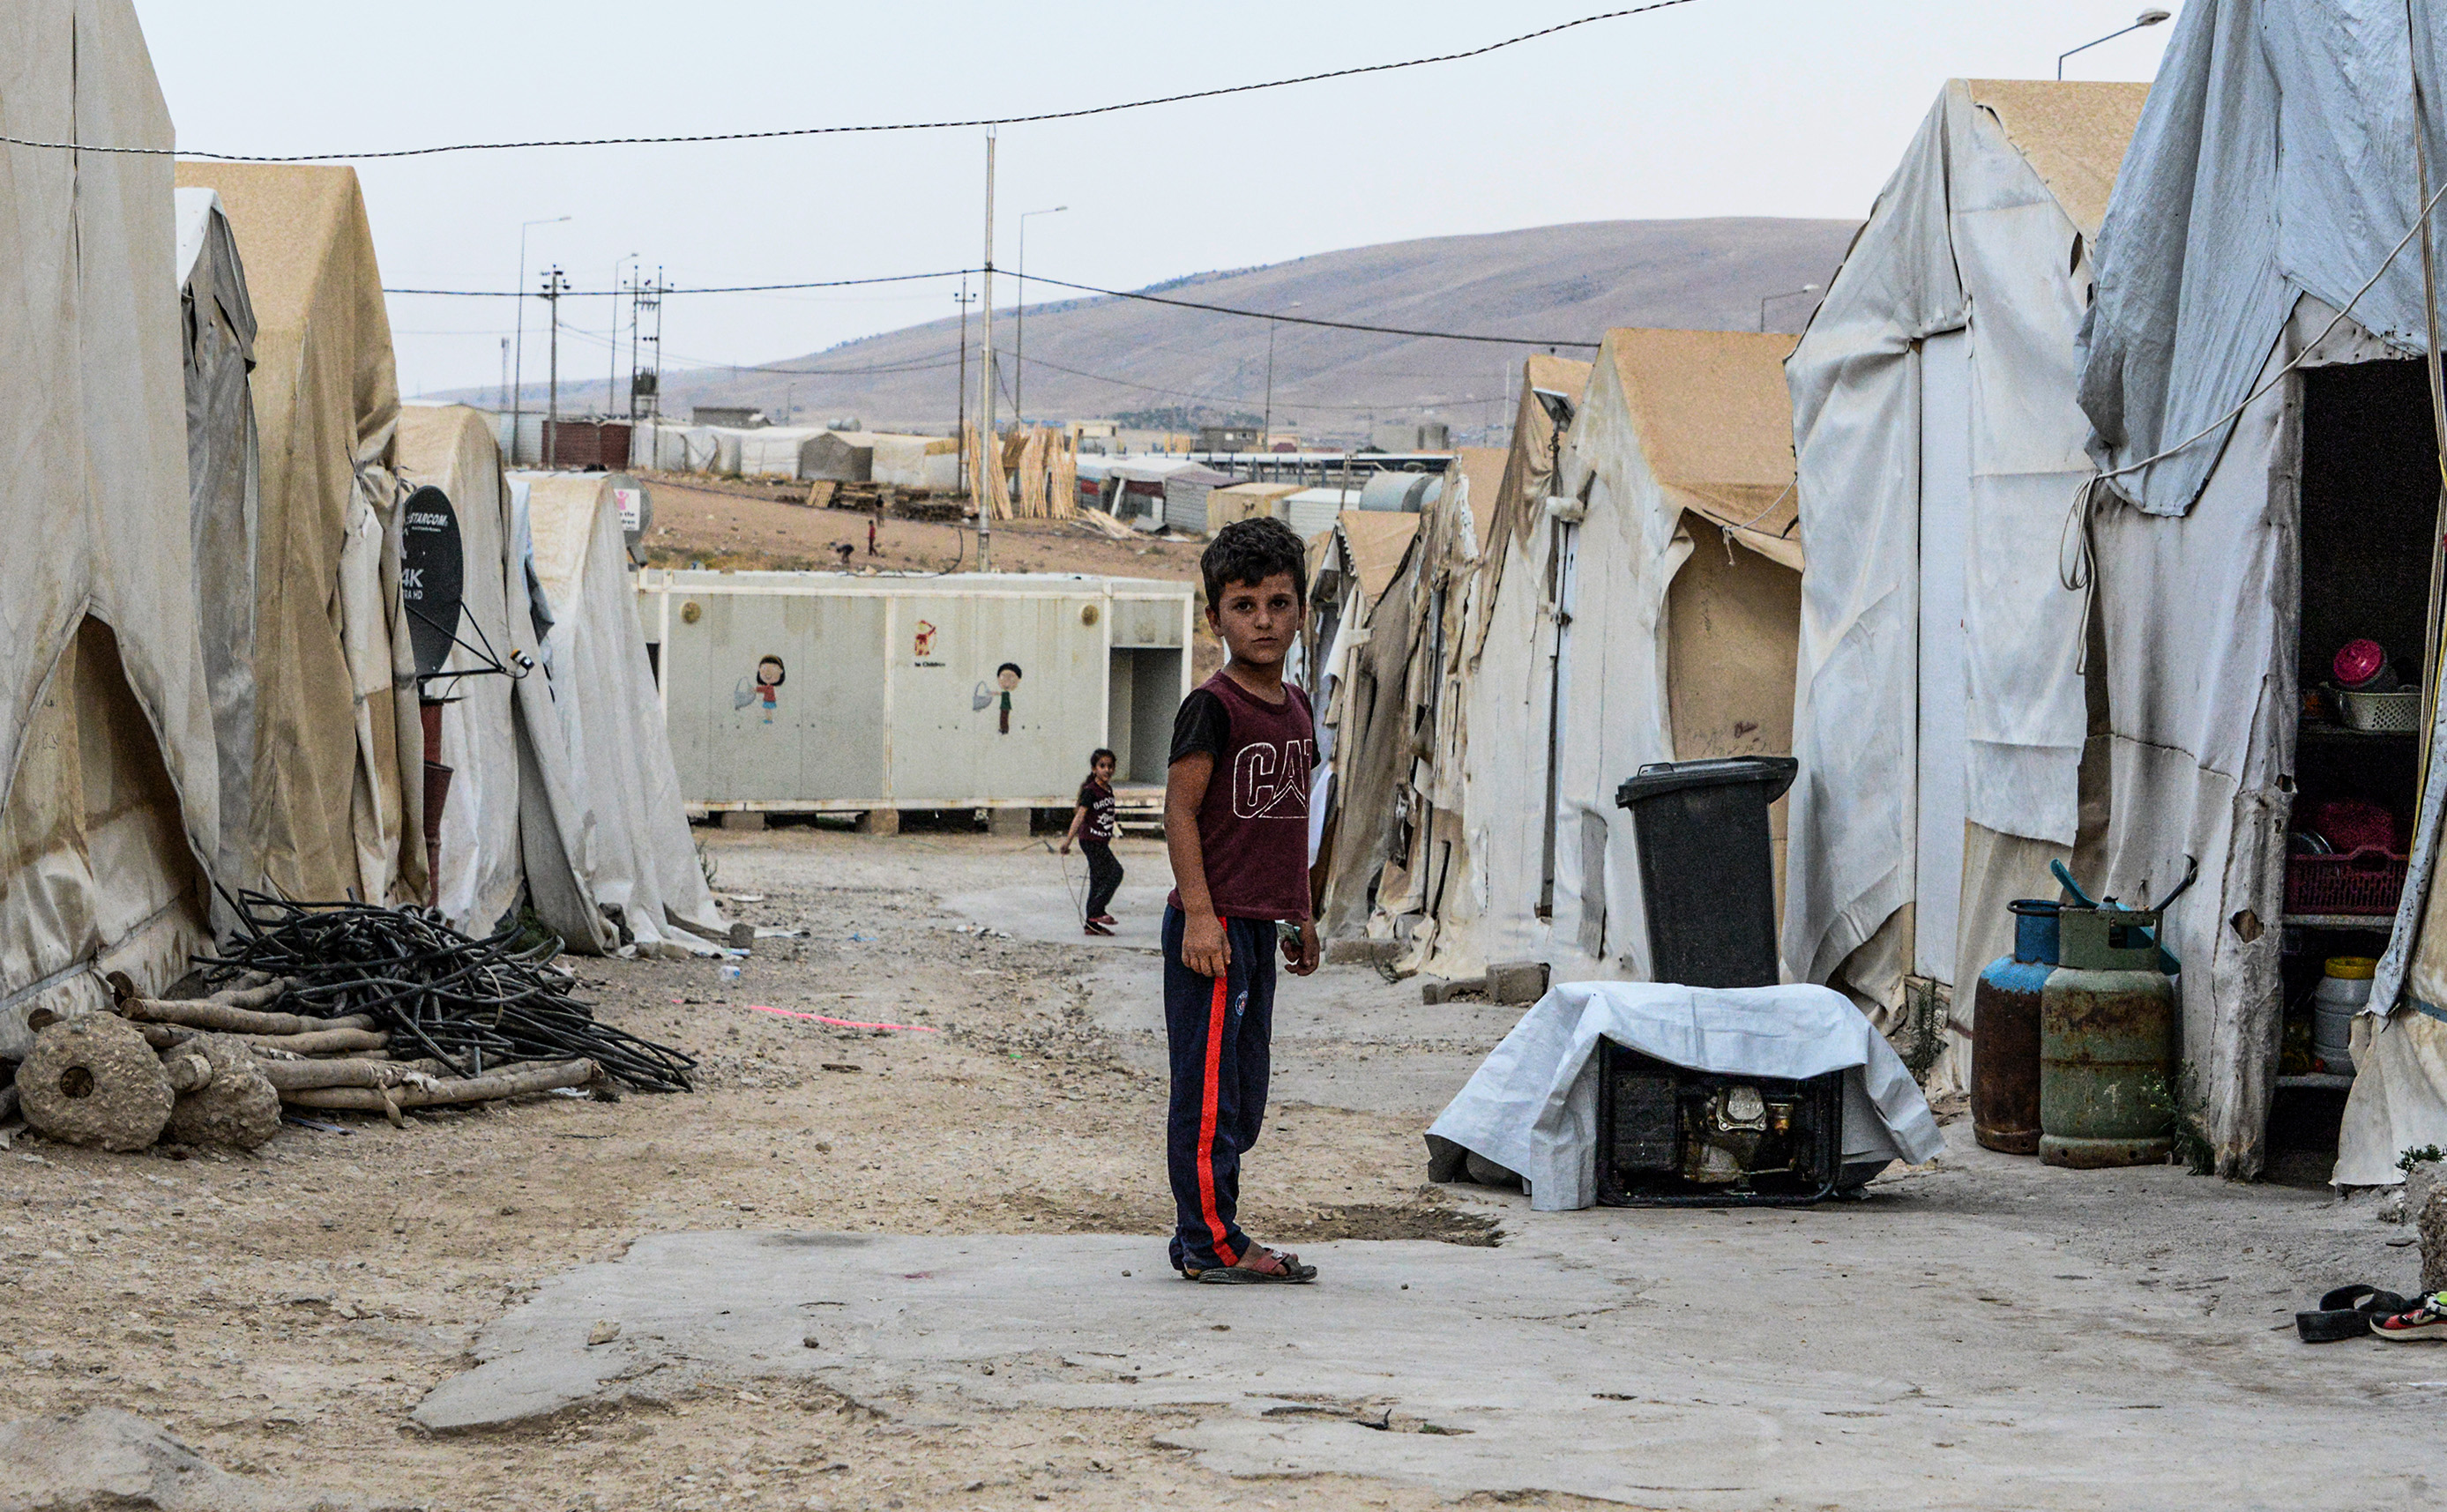 A boy stands between tents at a camp for internally displaced persons (IDP) of Iraq's Yazidi minority in the Sharya area, some 15 kilometres from the northern city of Dohuk in the autonomous Iraqi Kurdistan region on August 30, 2019. (Zaid Al-Obeidi—AFP/Getty Images)